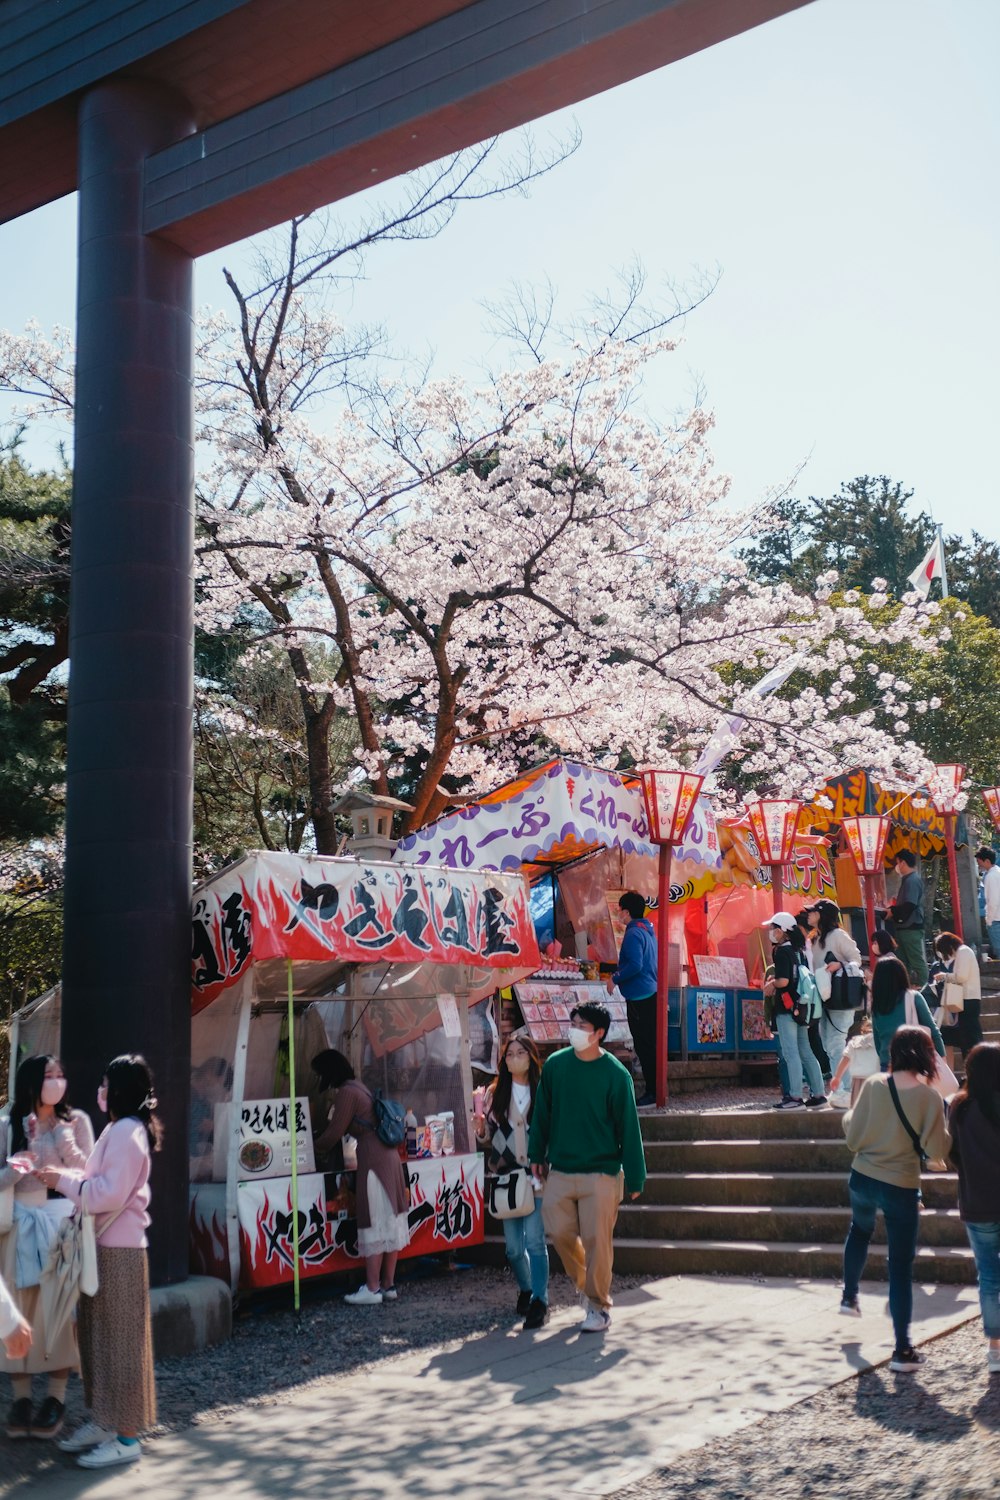 a group of people standing under a cherry blossom tree